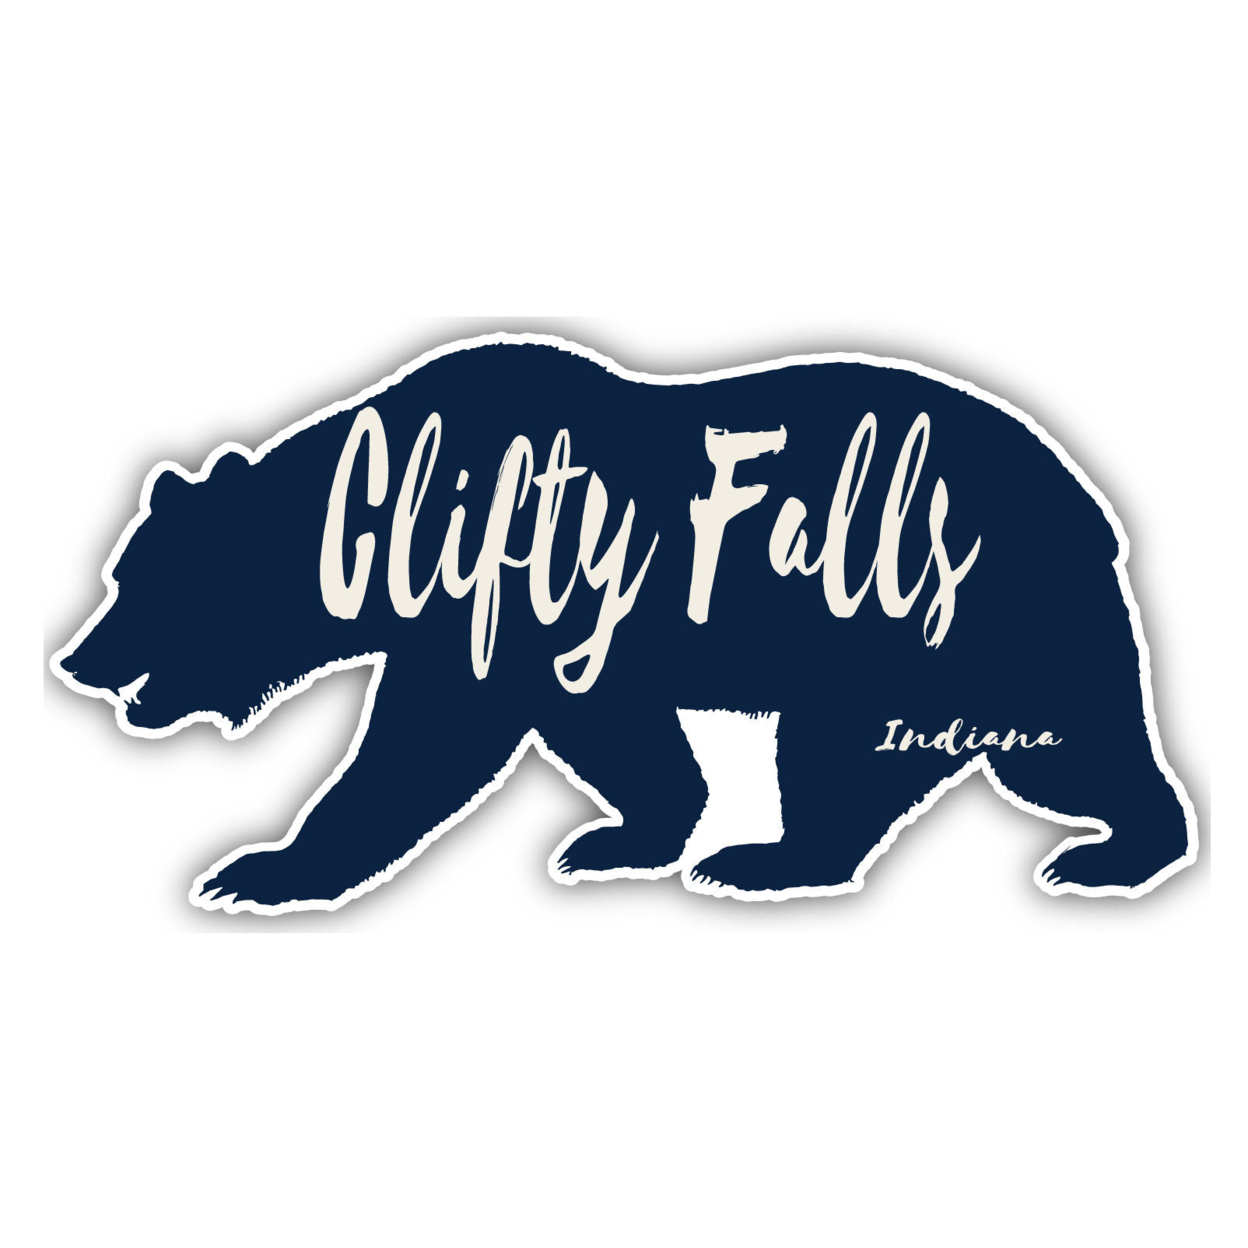 Clifty Falls Indiana Souvenir Decorative Stickers (Choose Theme And Size) - Single Unit, 8-Inch, Great Outdoors